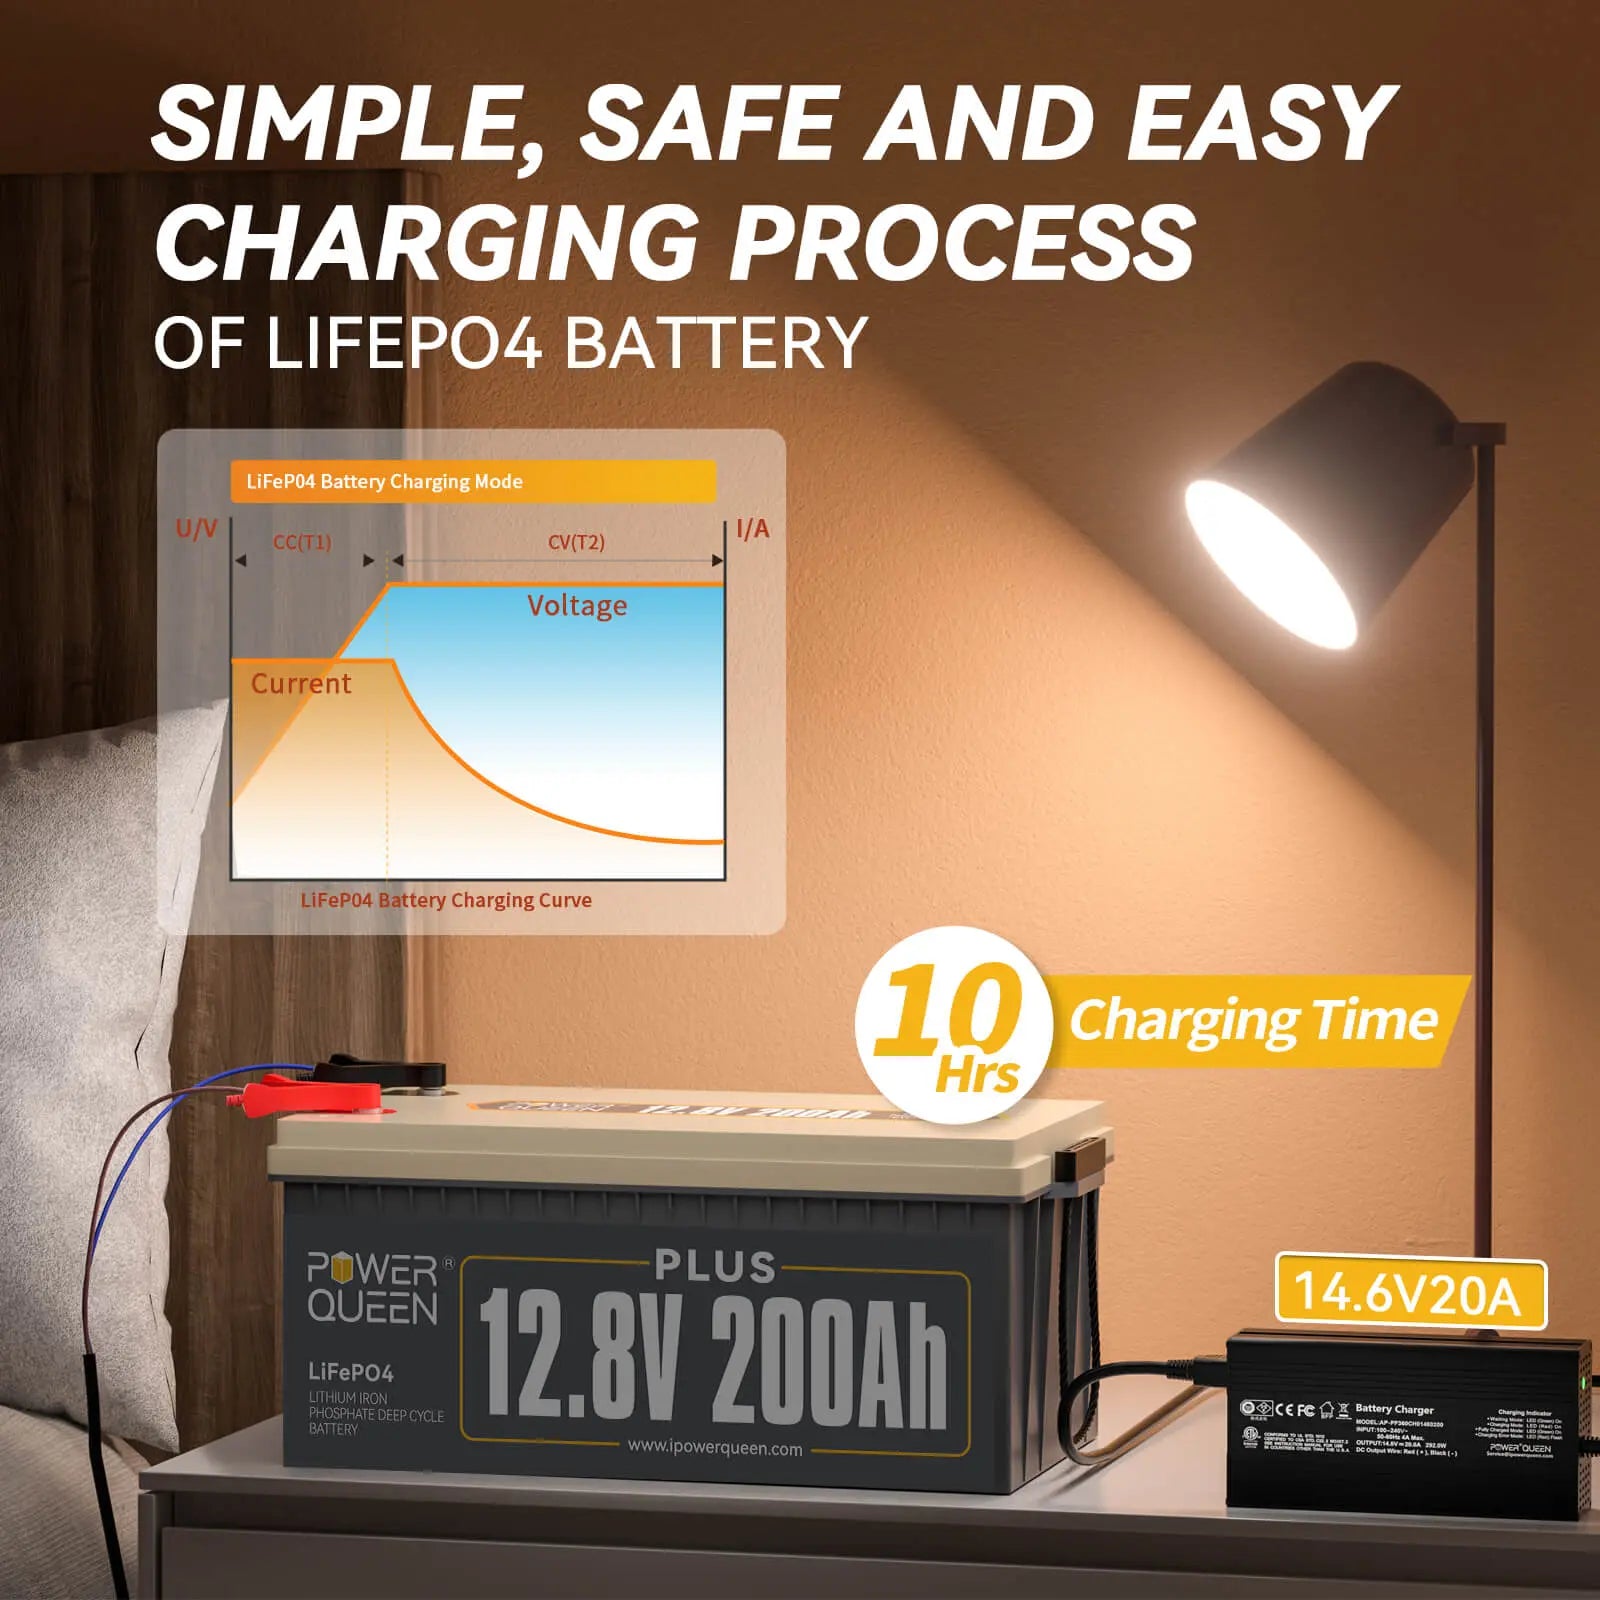     Power-Queen-12V-200Ah-Plus-LiFePO4-Battery-with-20A-LiFePO4-Battery-Charger-give-your-safty-guarateen